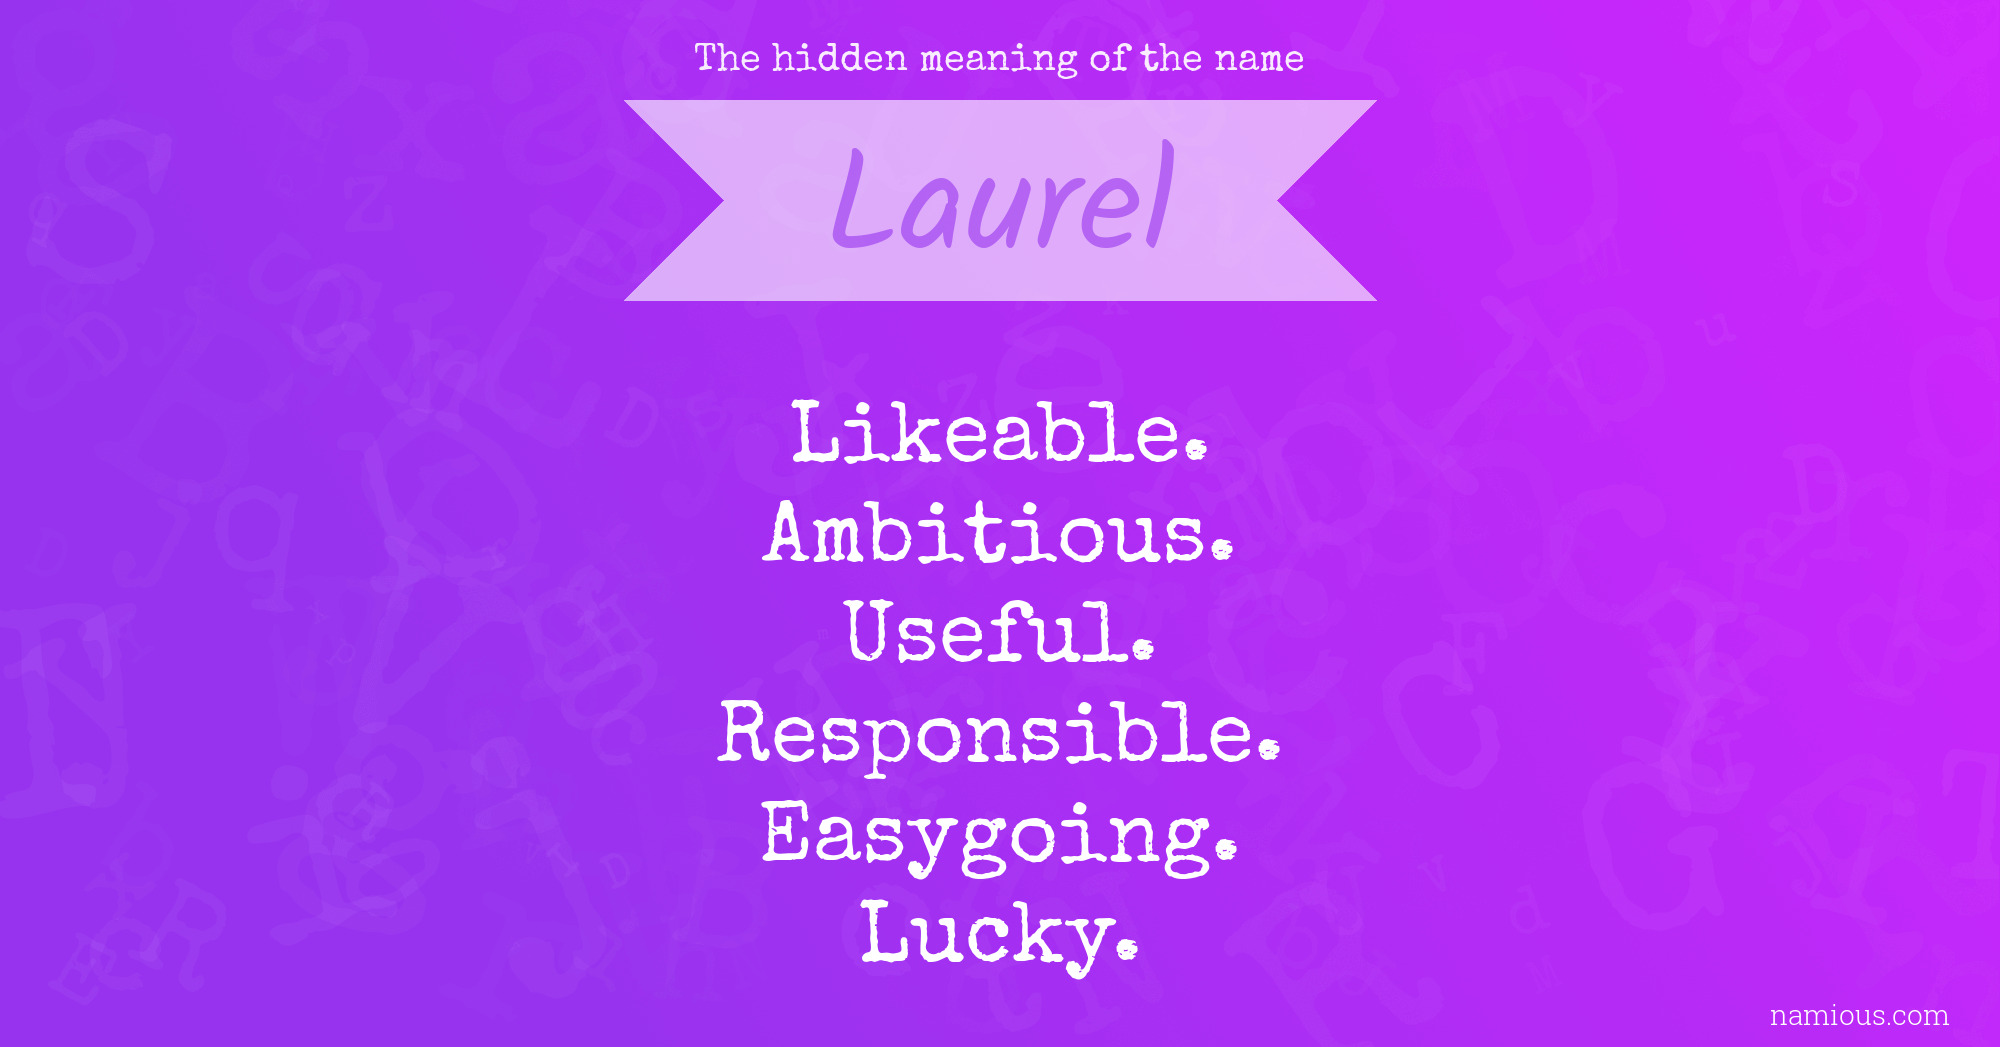 The hidden meaning of the name Laurel